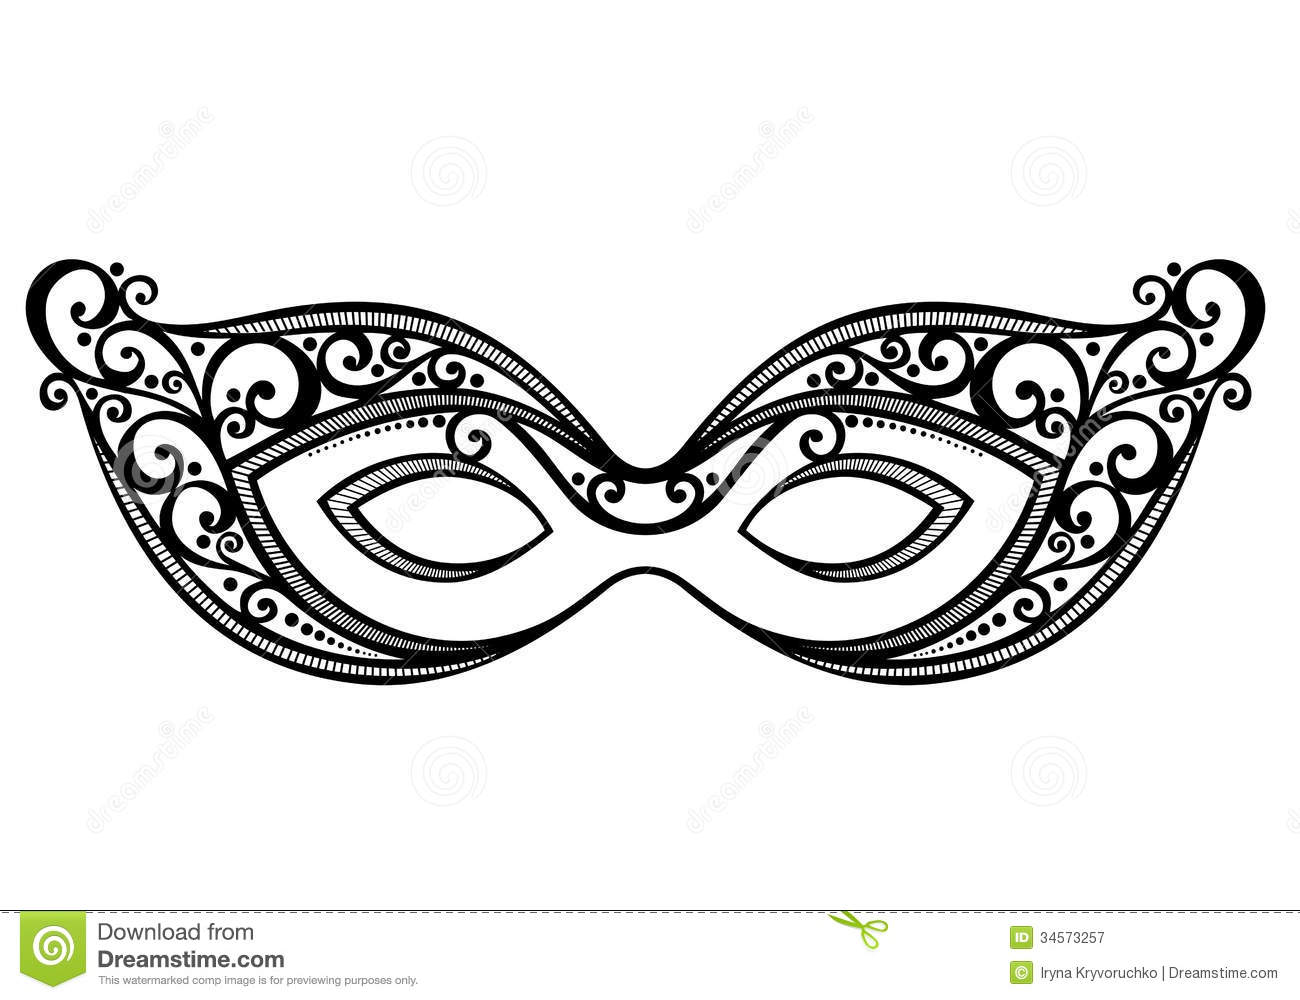 Masquerade Mask - Download From Over 27 Million High Quality Stock Photos, Images, Vectors